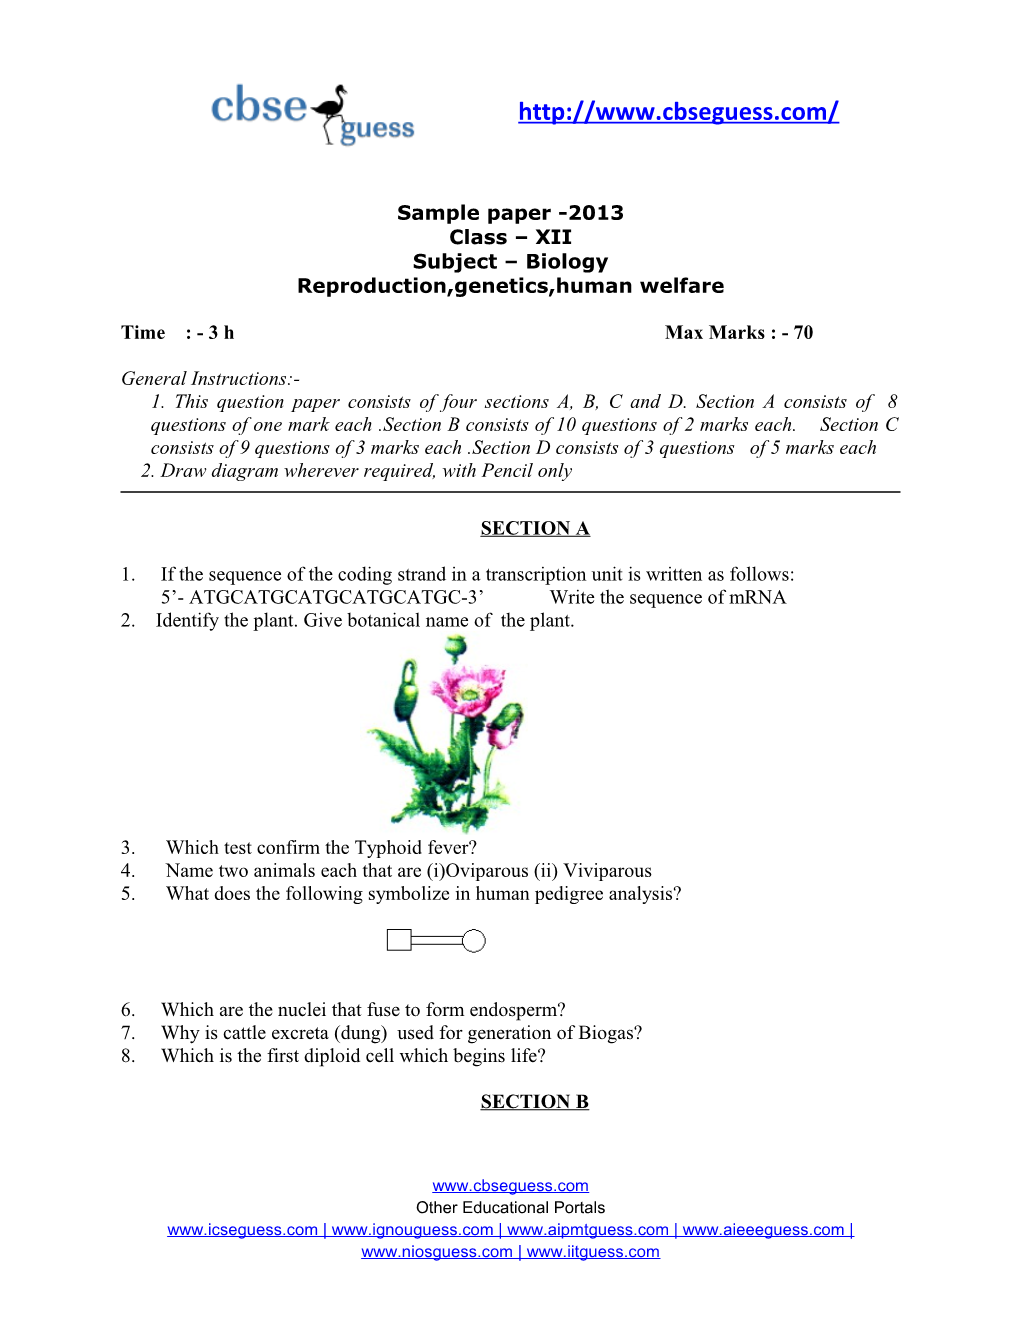 Sample Paper -2013 Class XII Subject Biology